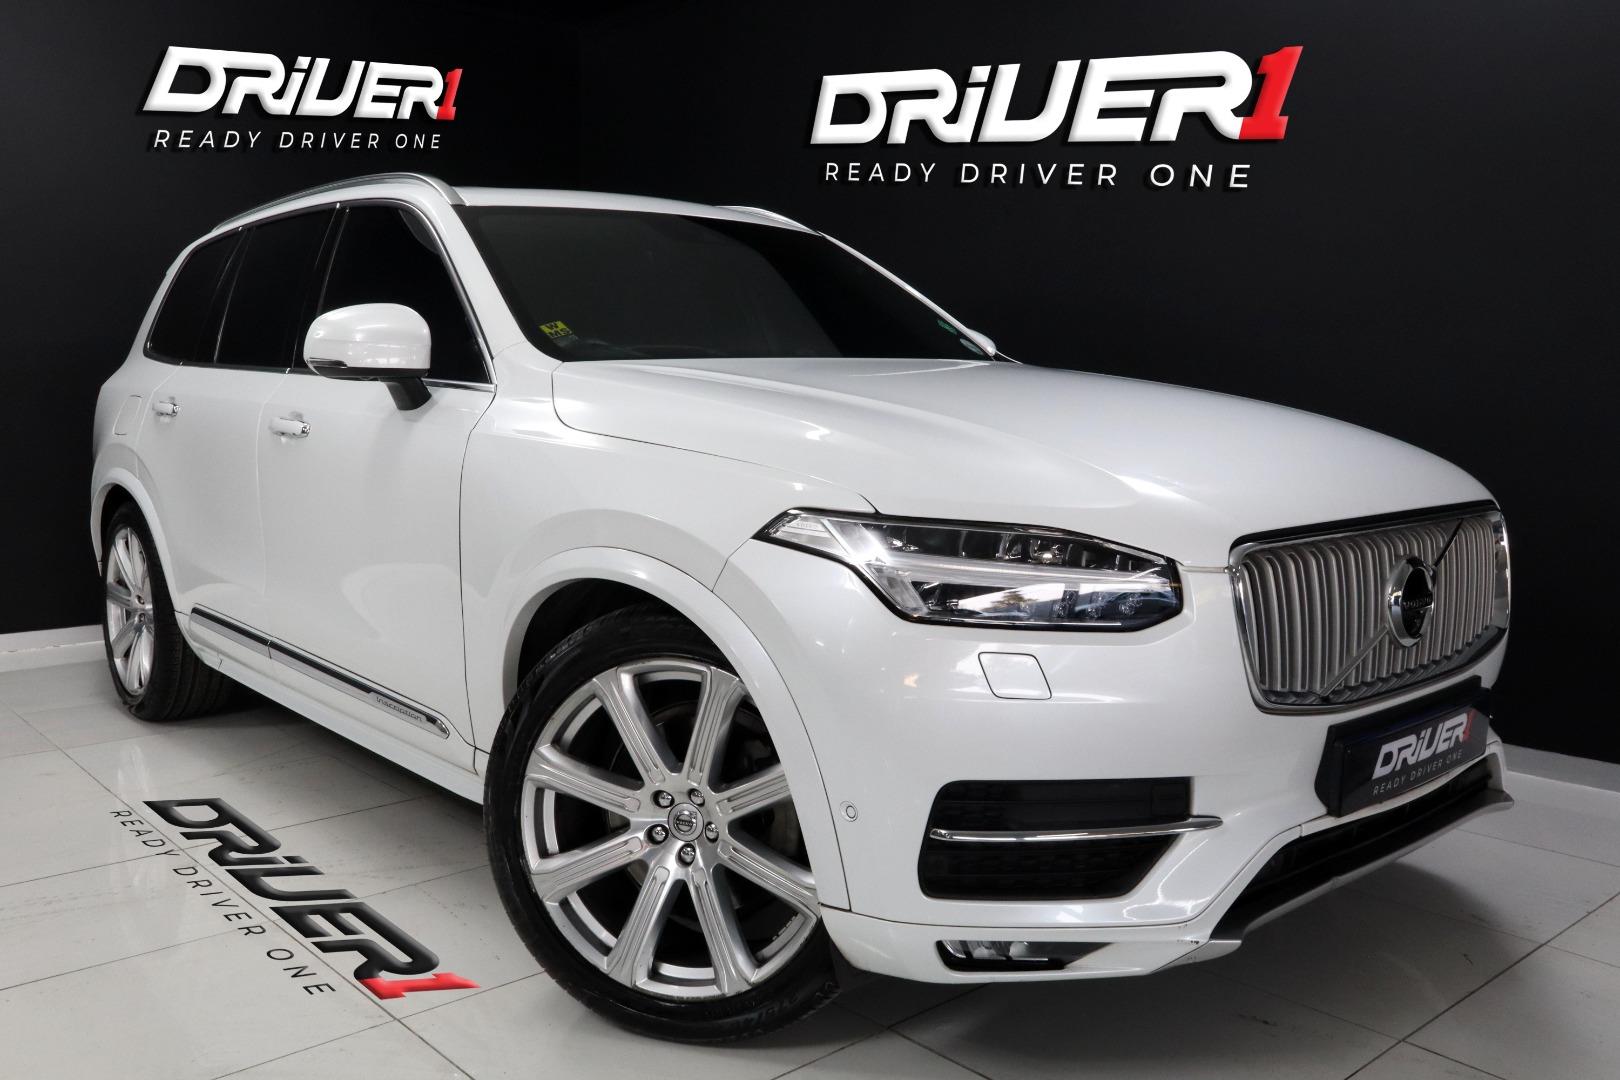 2019 Volvo Xc90 D5 Inscription Awd Geartronic for sale - 333726